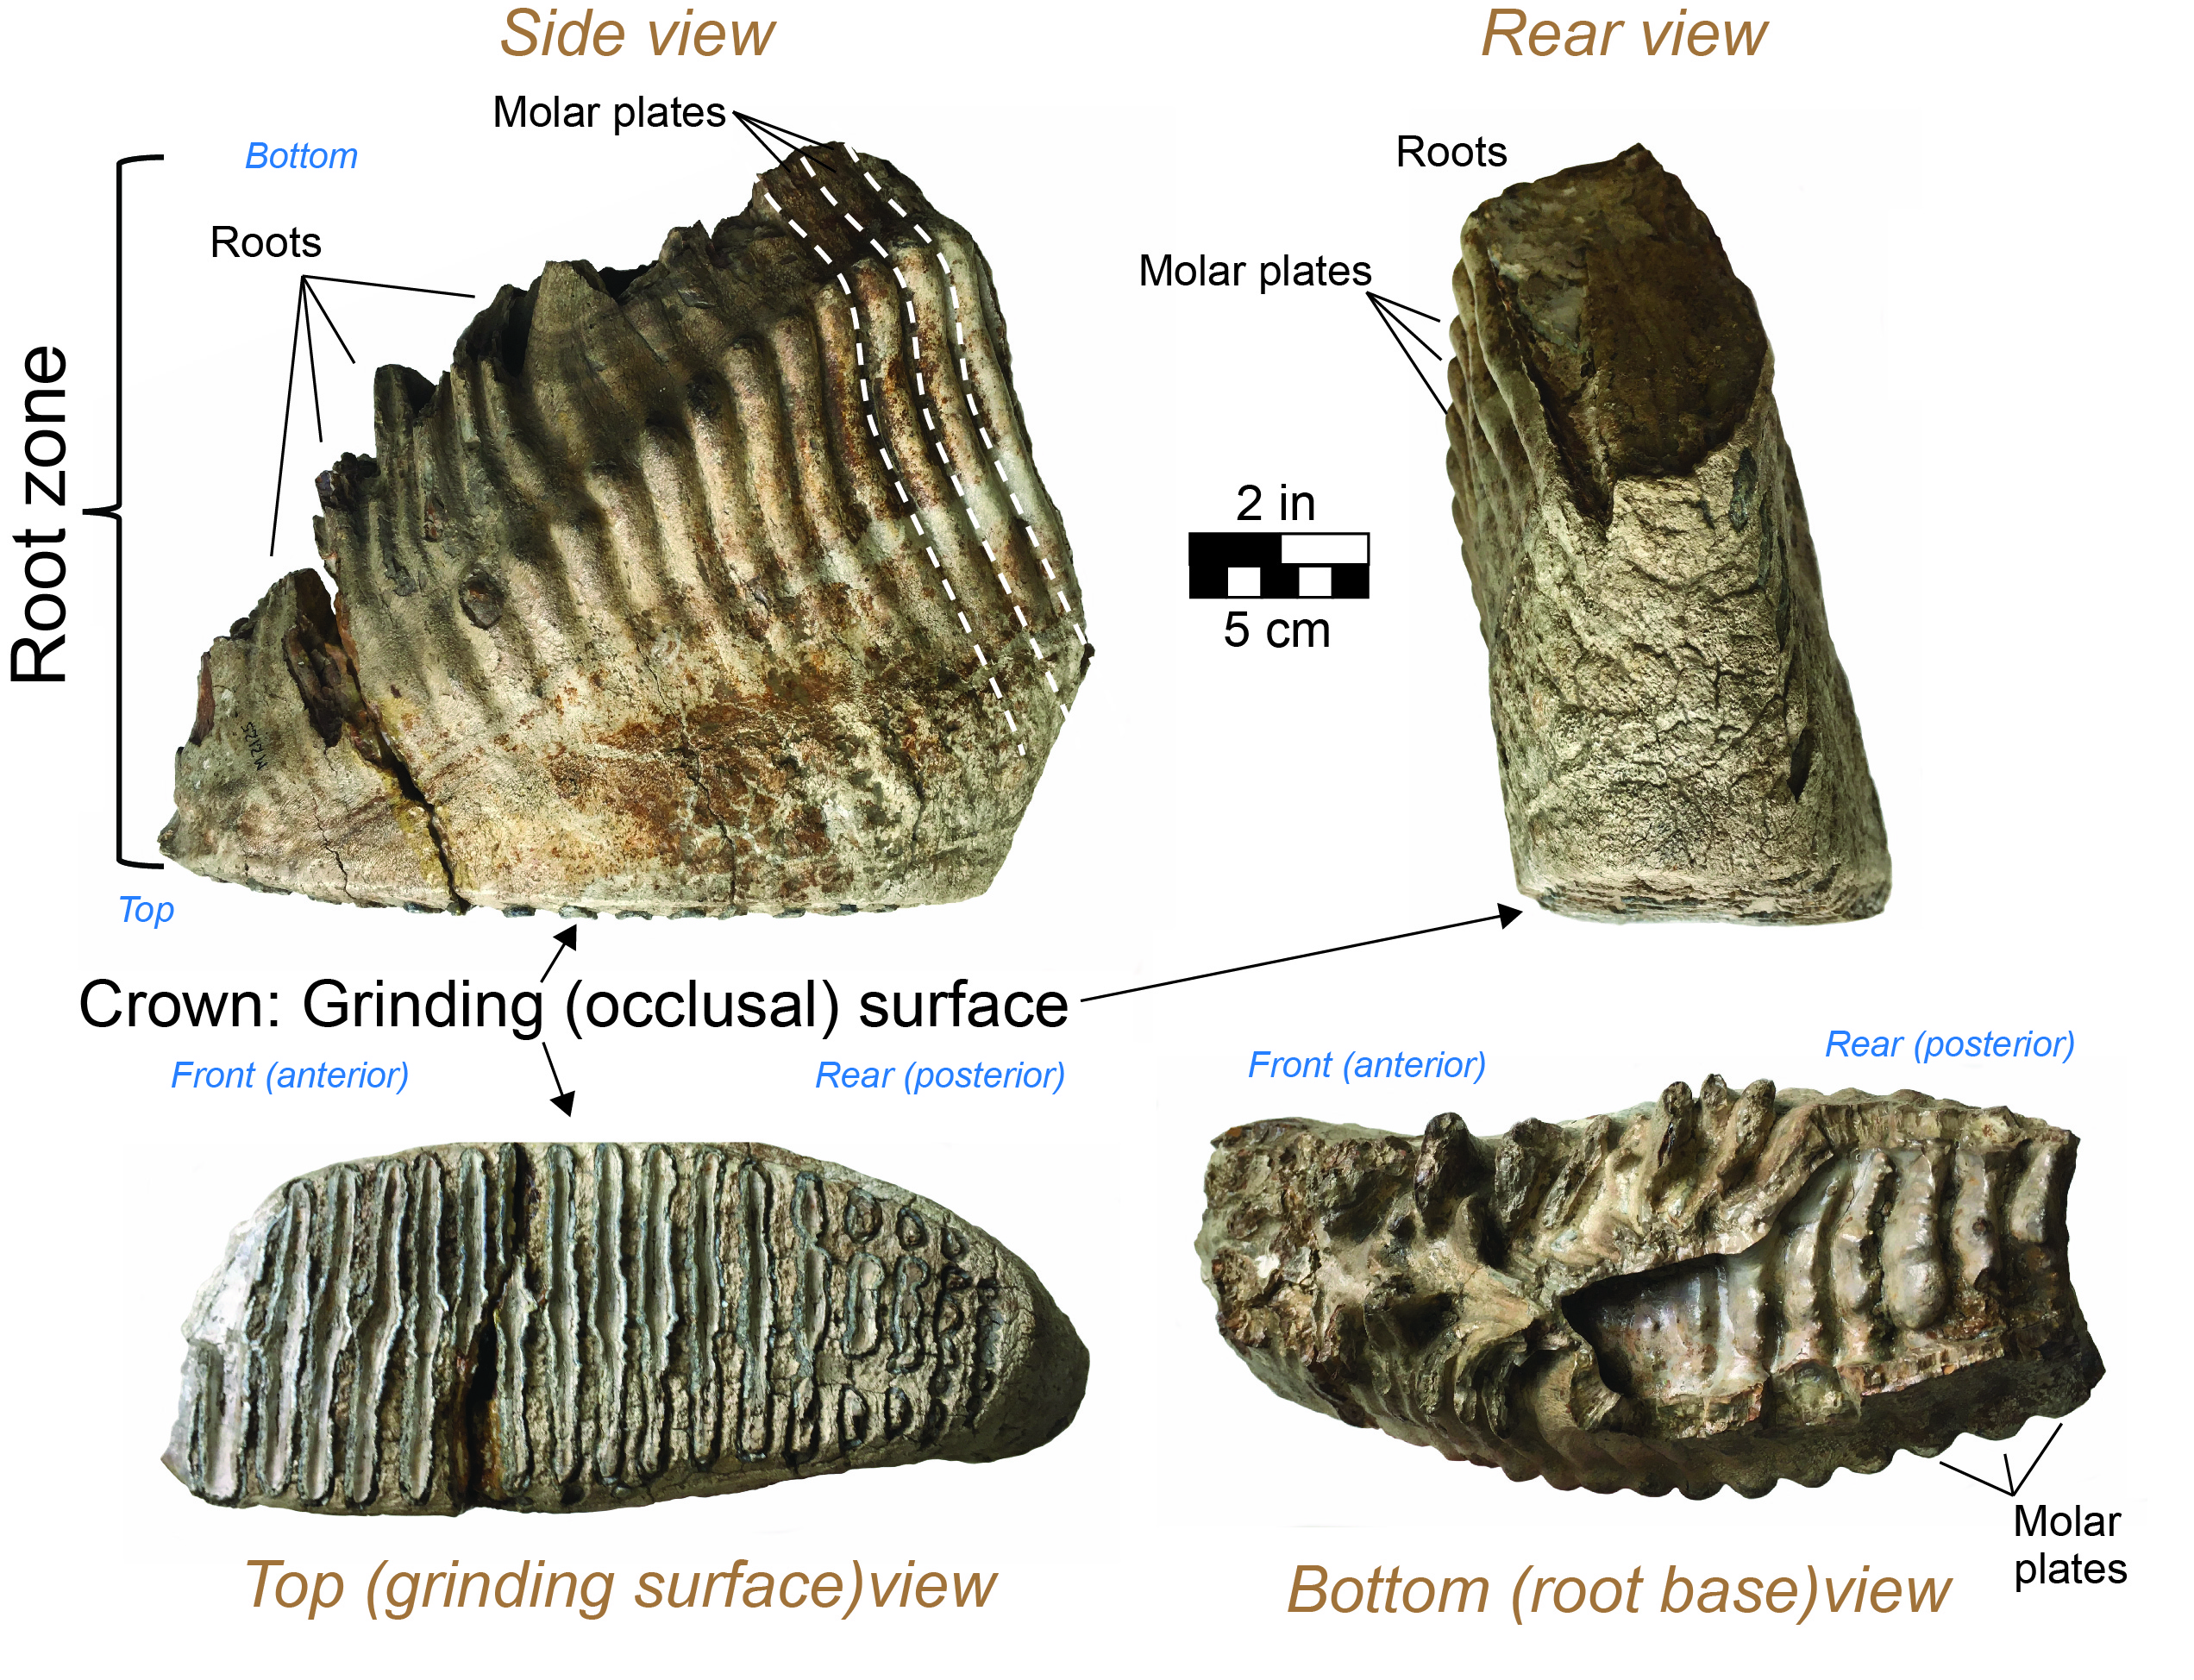 Different sides of a fossil mammoth molar tooth from northern Kentucky.